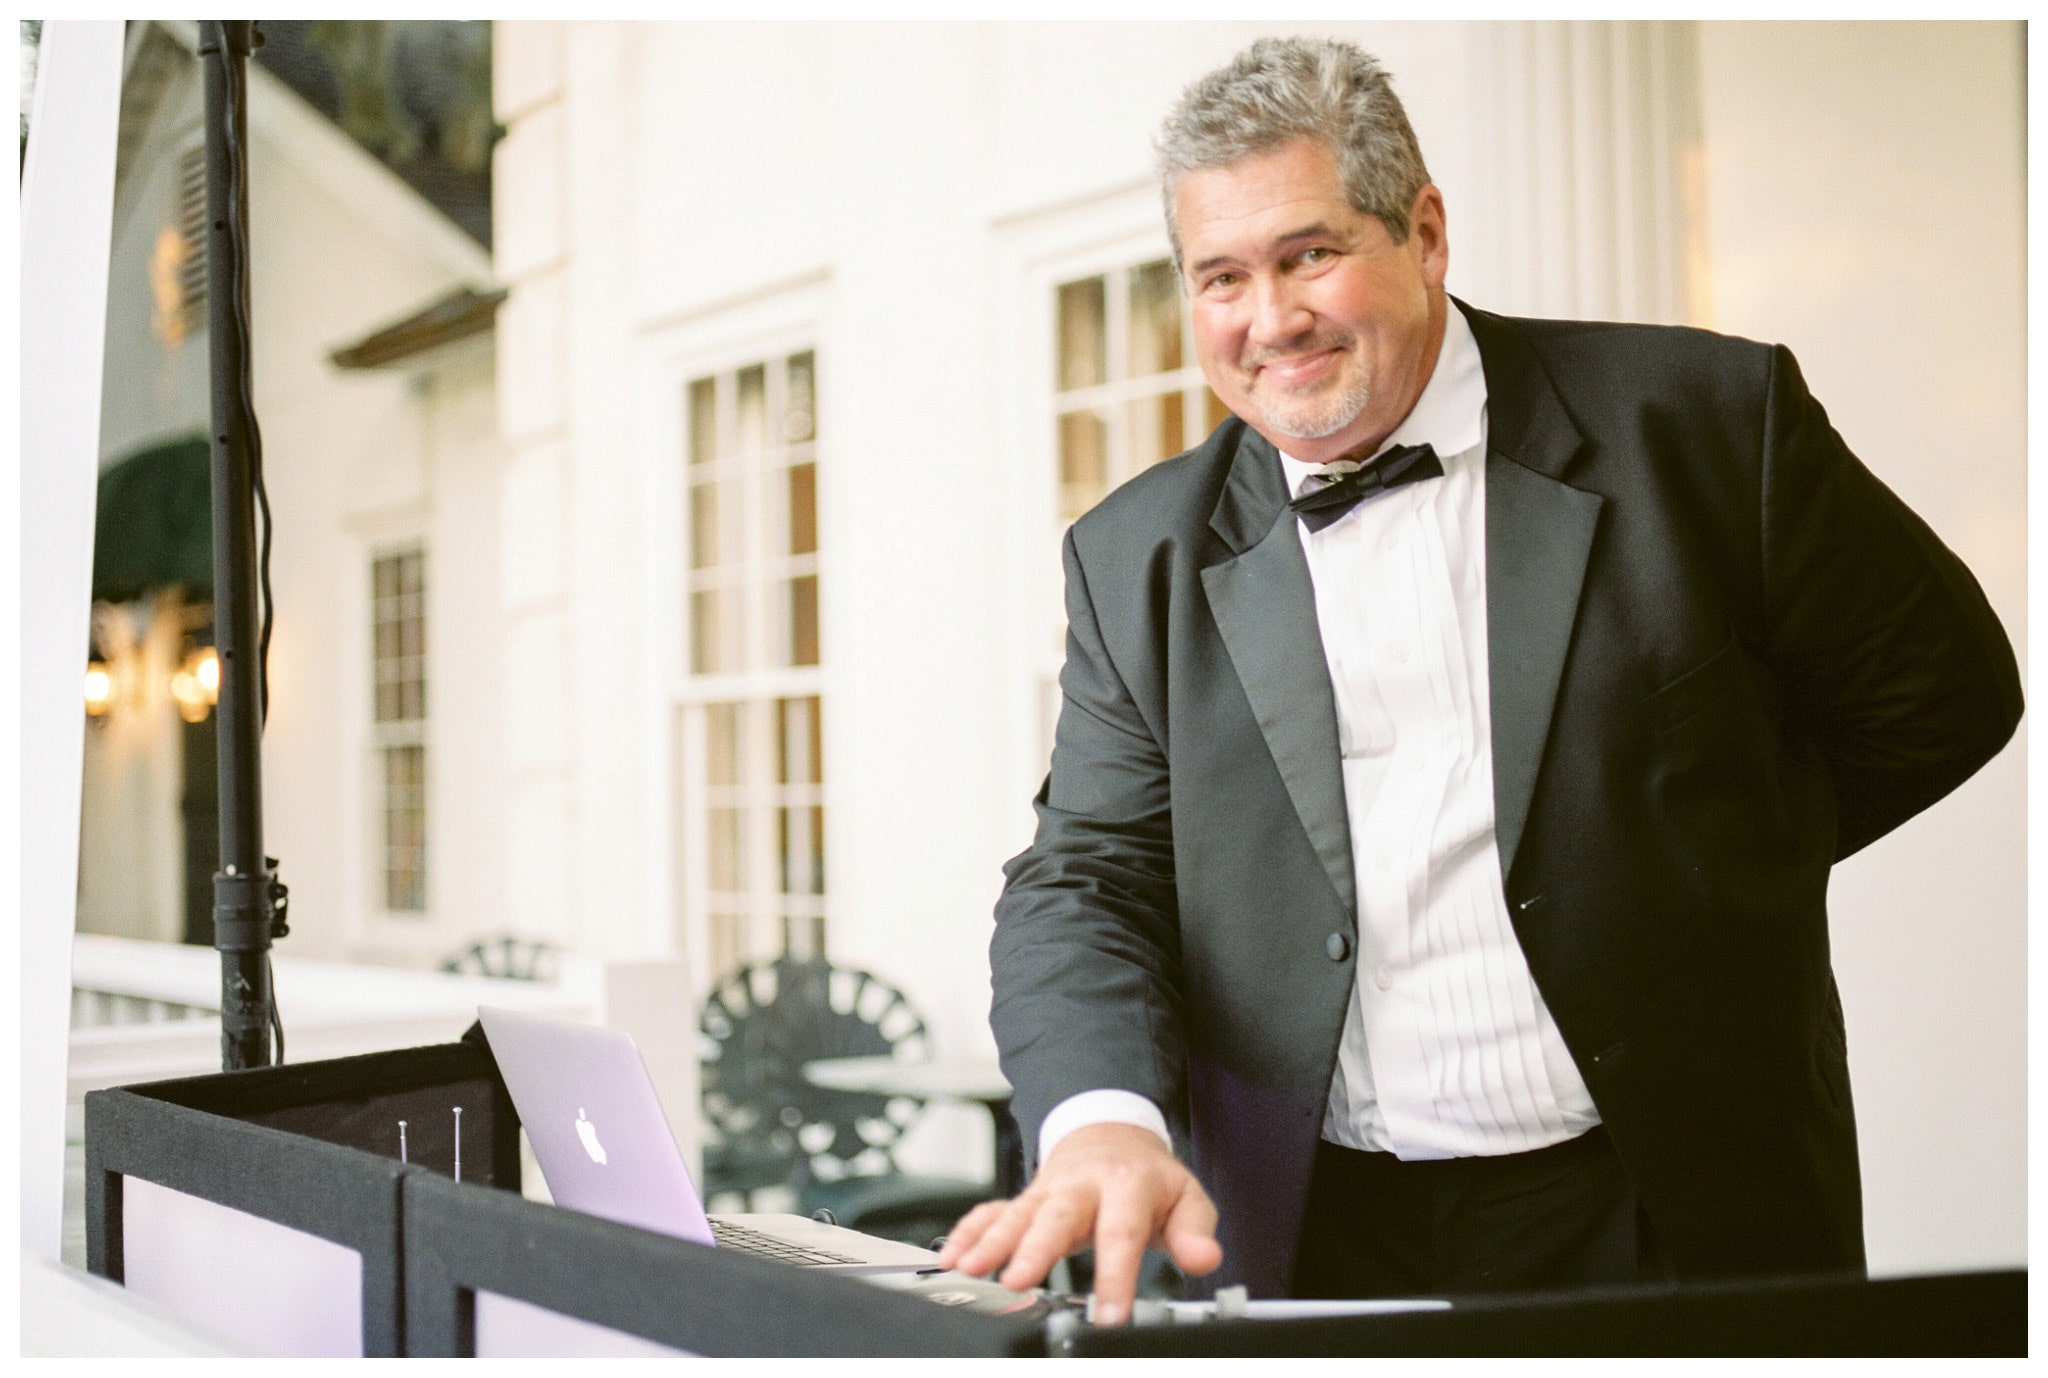 Paul Matthews Entertainment in a tux playing a keyboard, Kay and Josh's wedding at the Heritage Plantation, Pawleys Island, South Carolina on September 19, 2015 Heritage Plantation Southern wedding, Pawleys Island, South Carolina Venue and Catering: Heritage Club, Pawleys Island Music: Paul Matthews Entertainment Brides dress: The Little White Dress Cake: Buttercream Cakes and Catering Event Rentals: Eventworks Photographer: One Life Photography